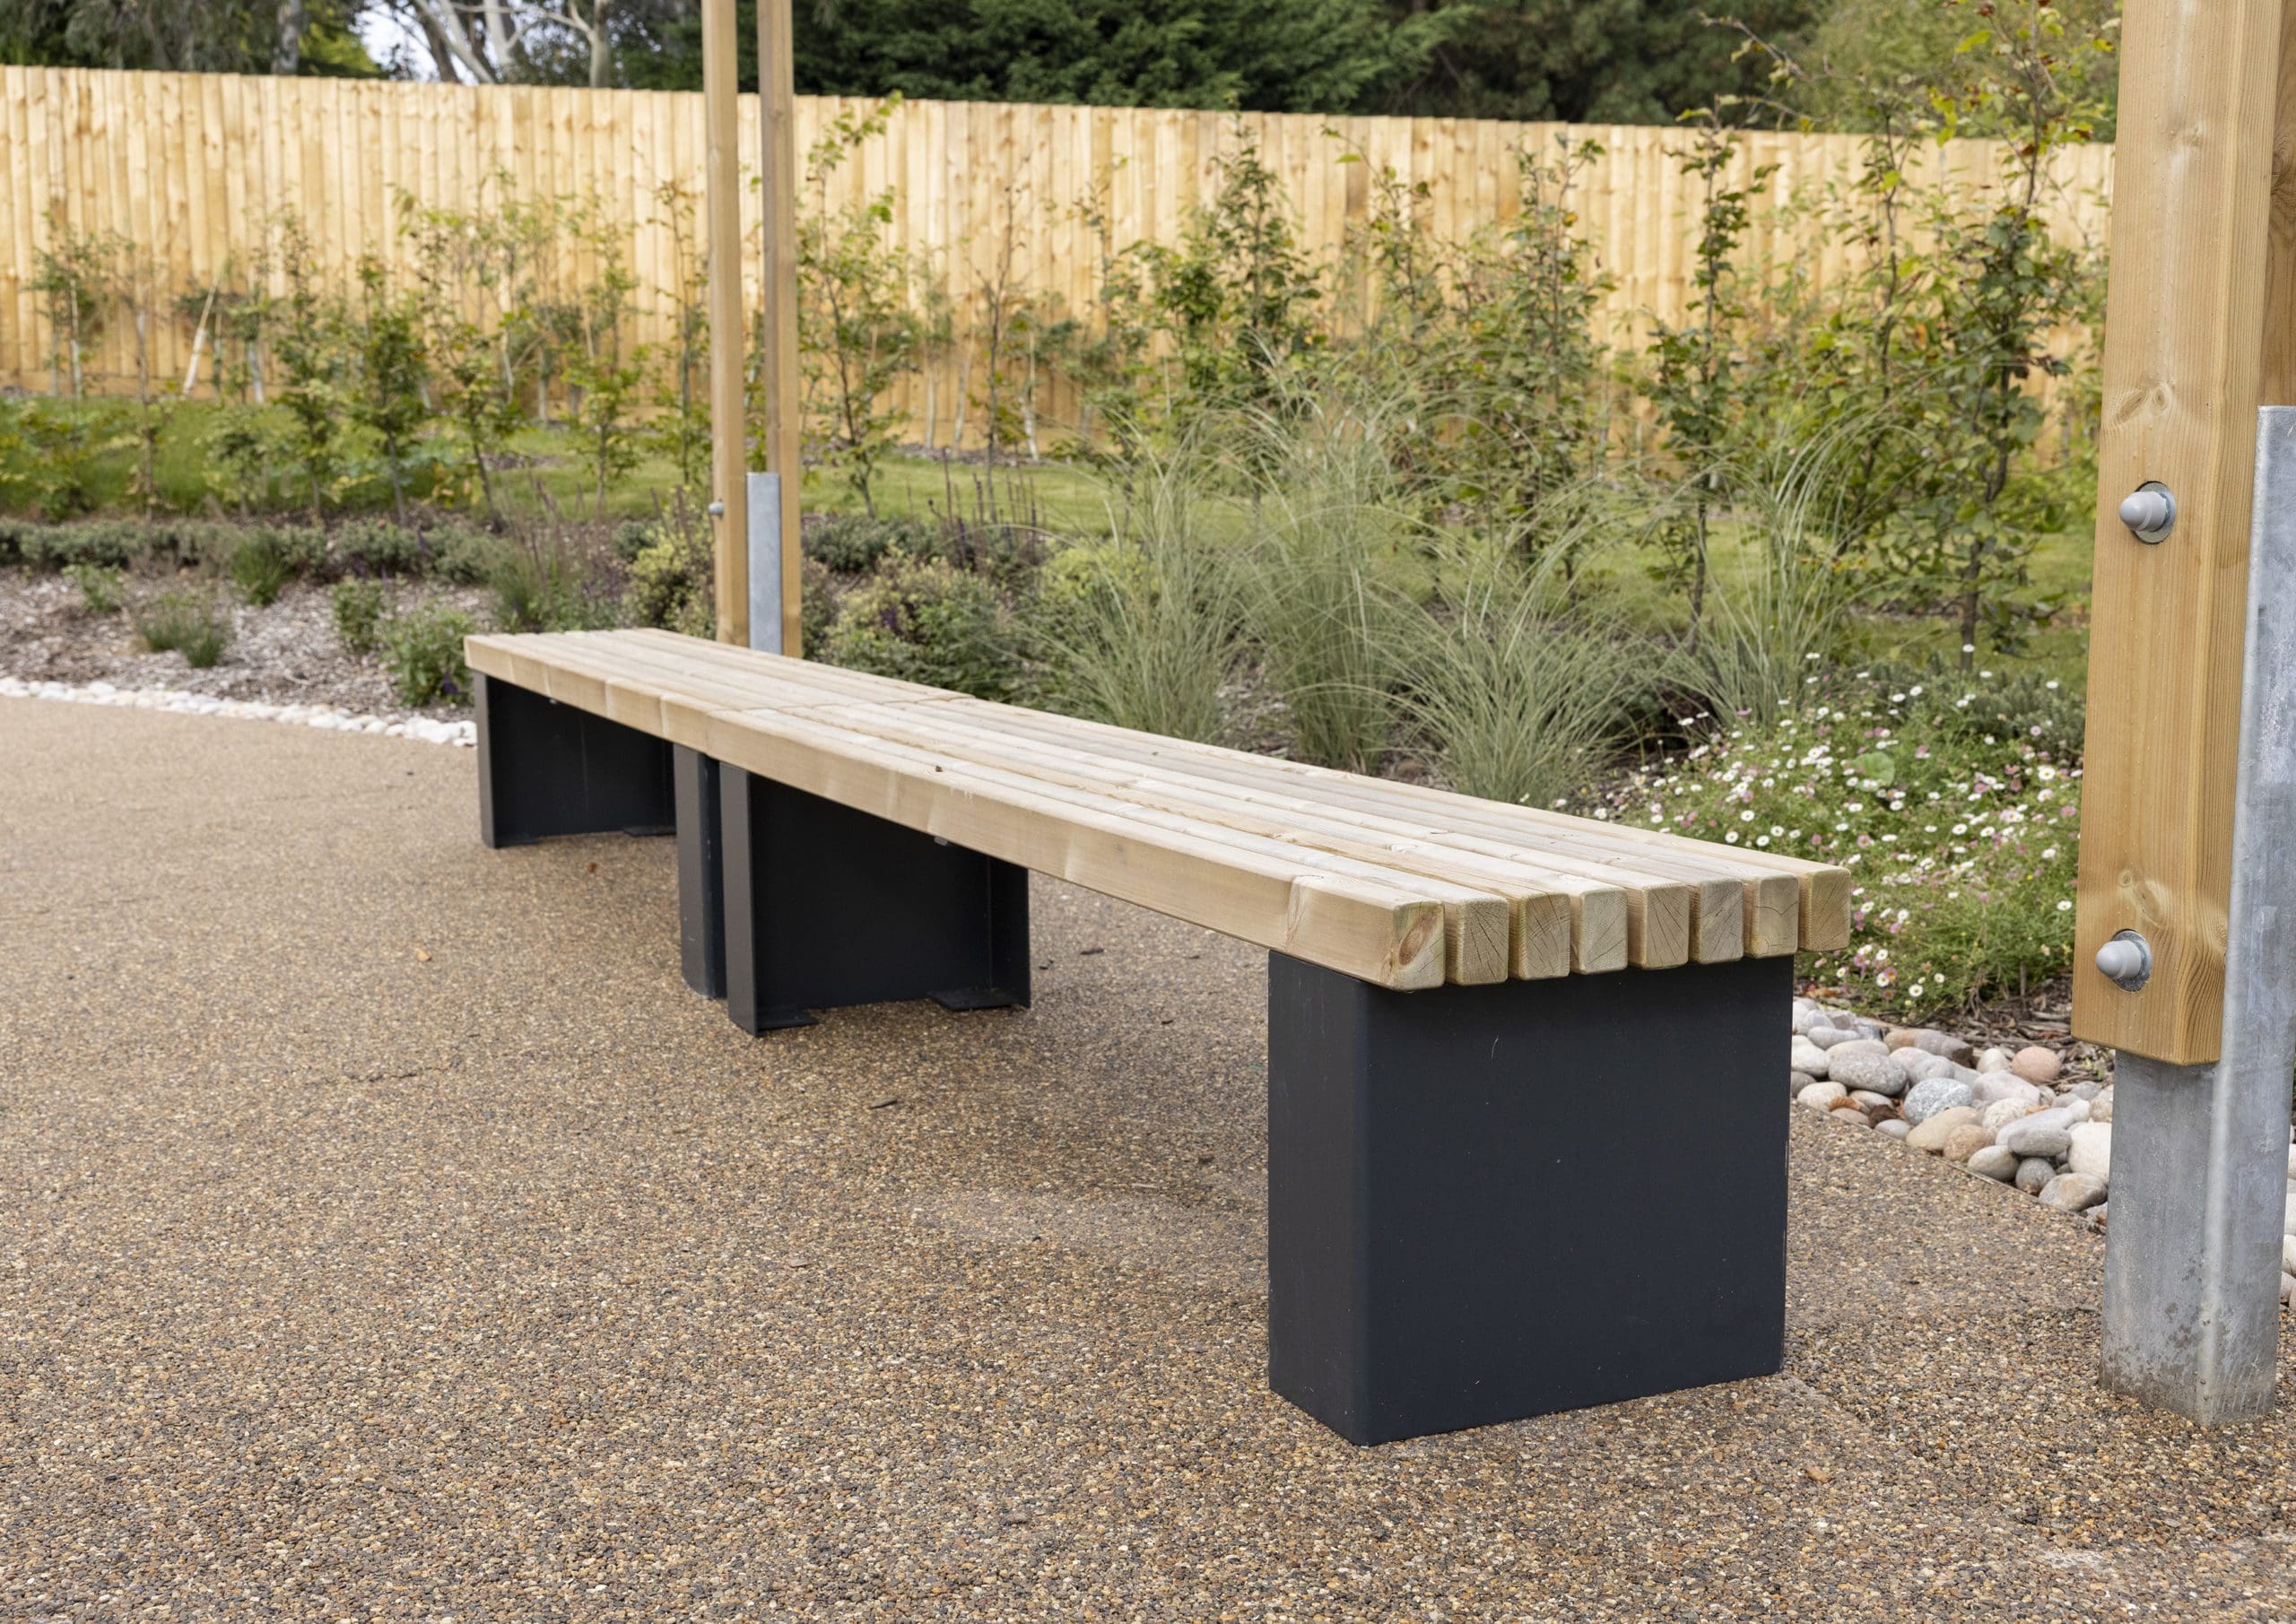 Wooden benches with black plinth legs